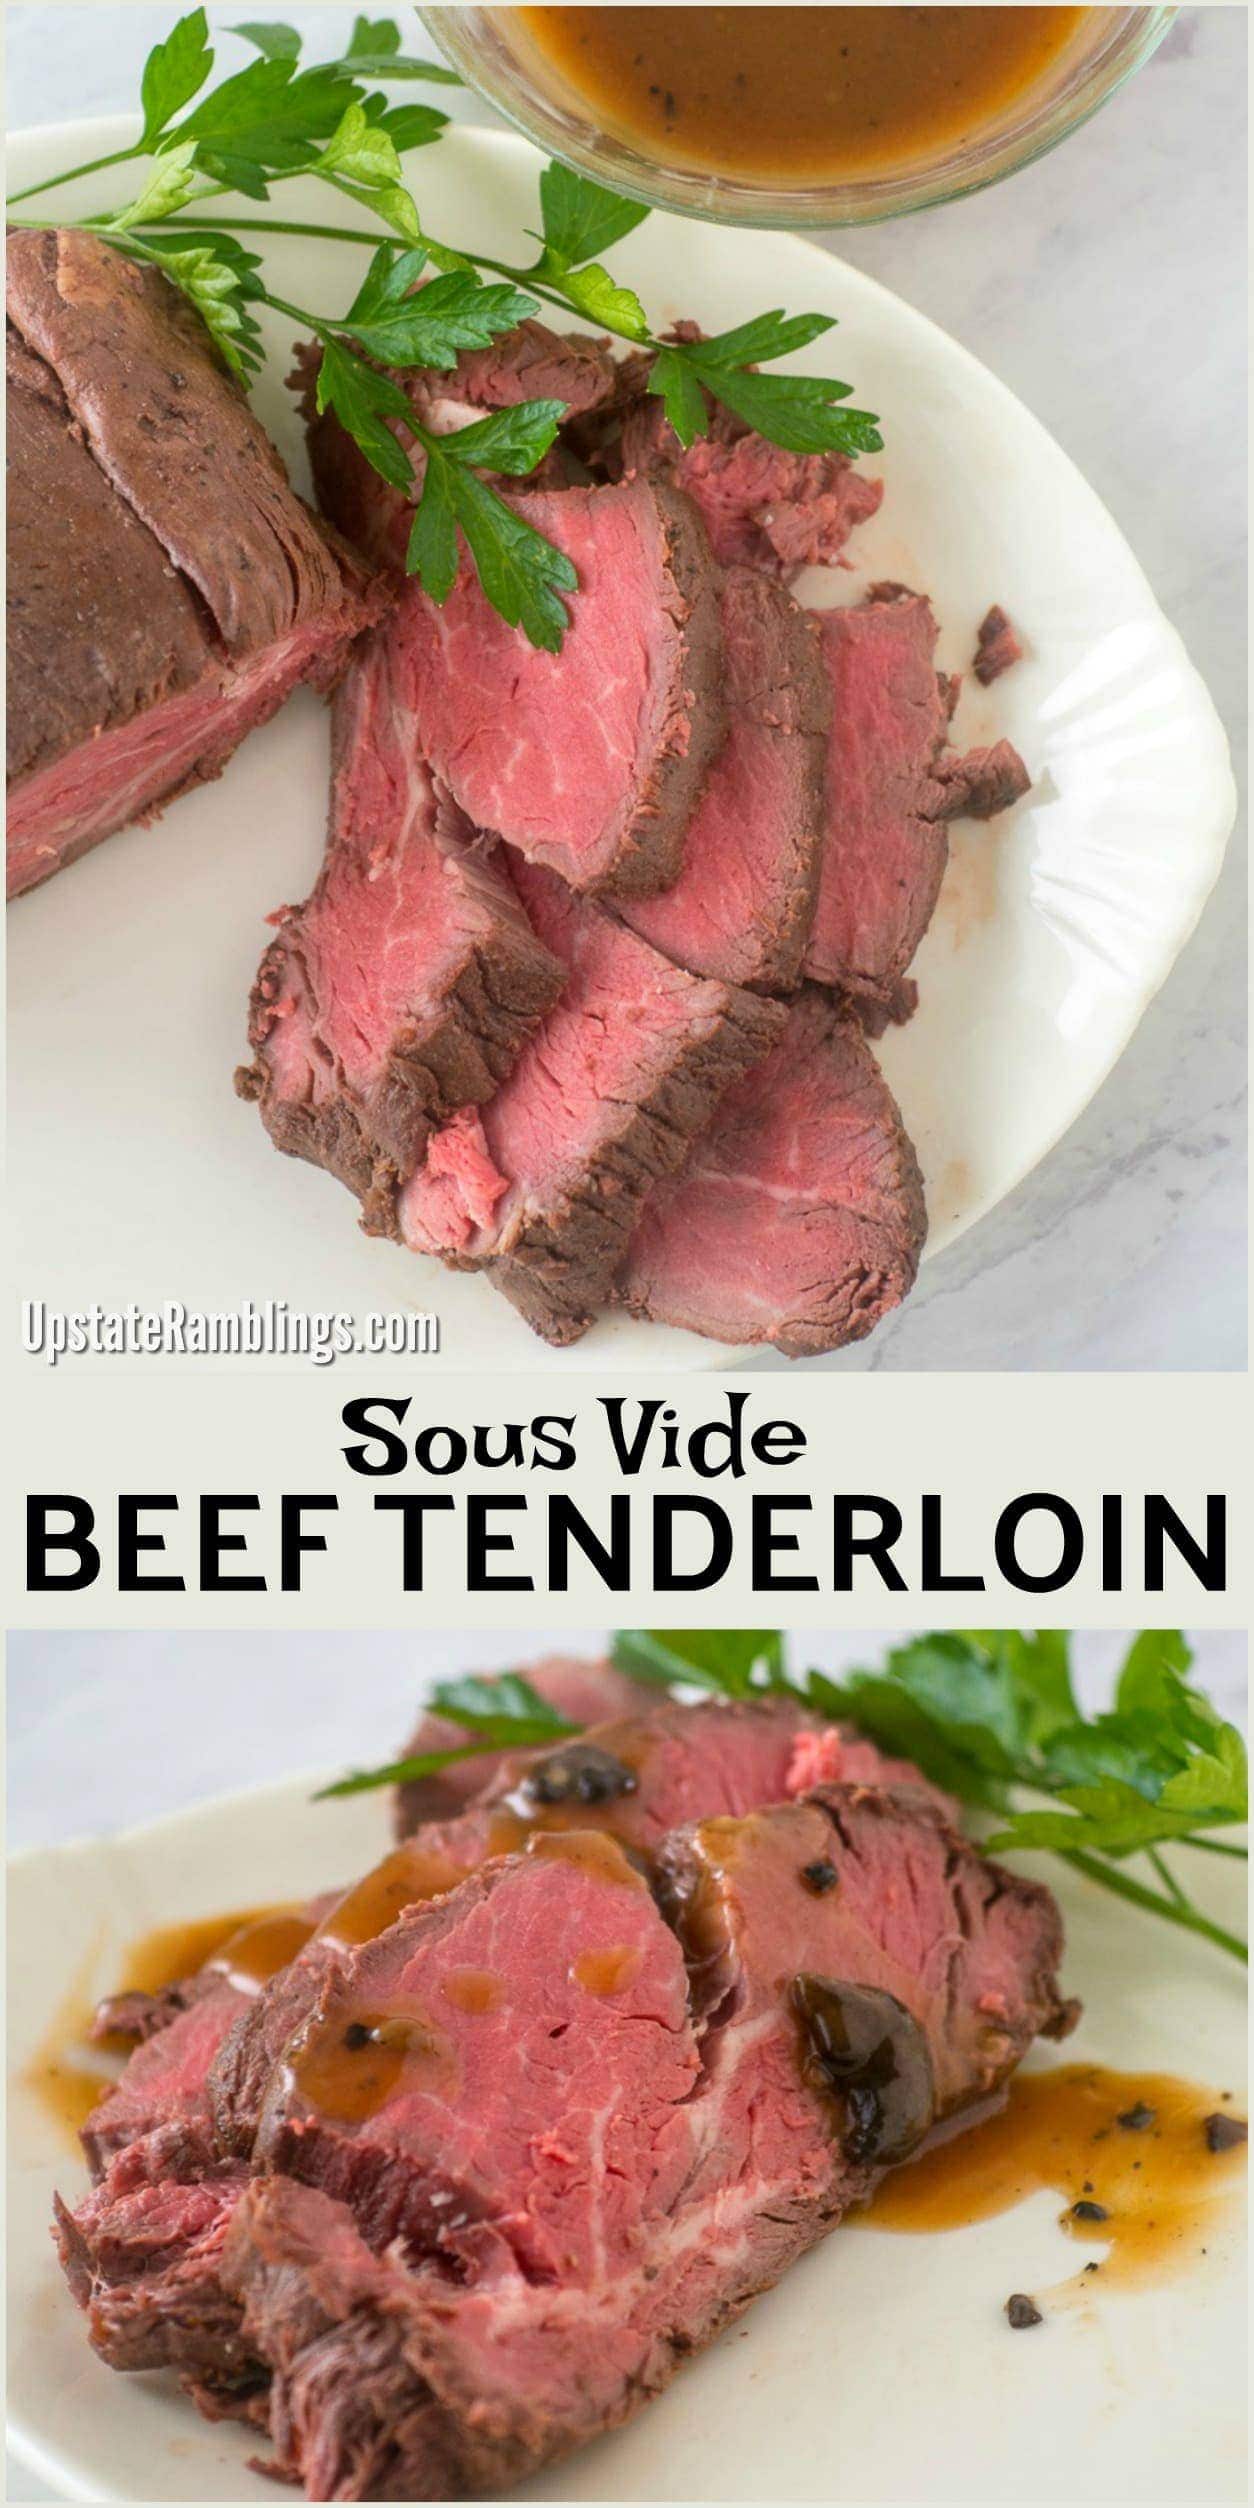 This recipe for Sous Vide Beef Tenderloin gives you the perfect roast every time. And an elegant beef tenderloin is the perfect centerpiece for a special dinner like Christmas Day or New Year's that is delicious and surprisingly easy to make. #beeftenderloin #sousvide #christmasdinner